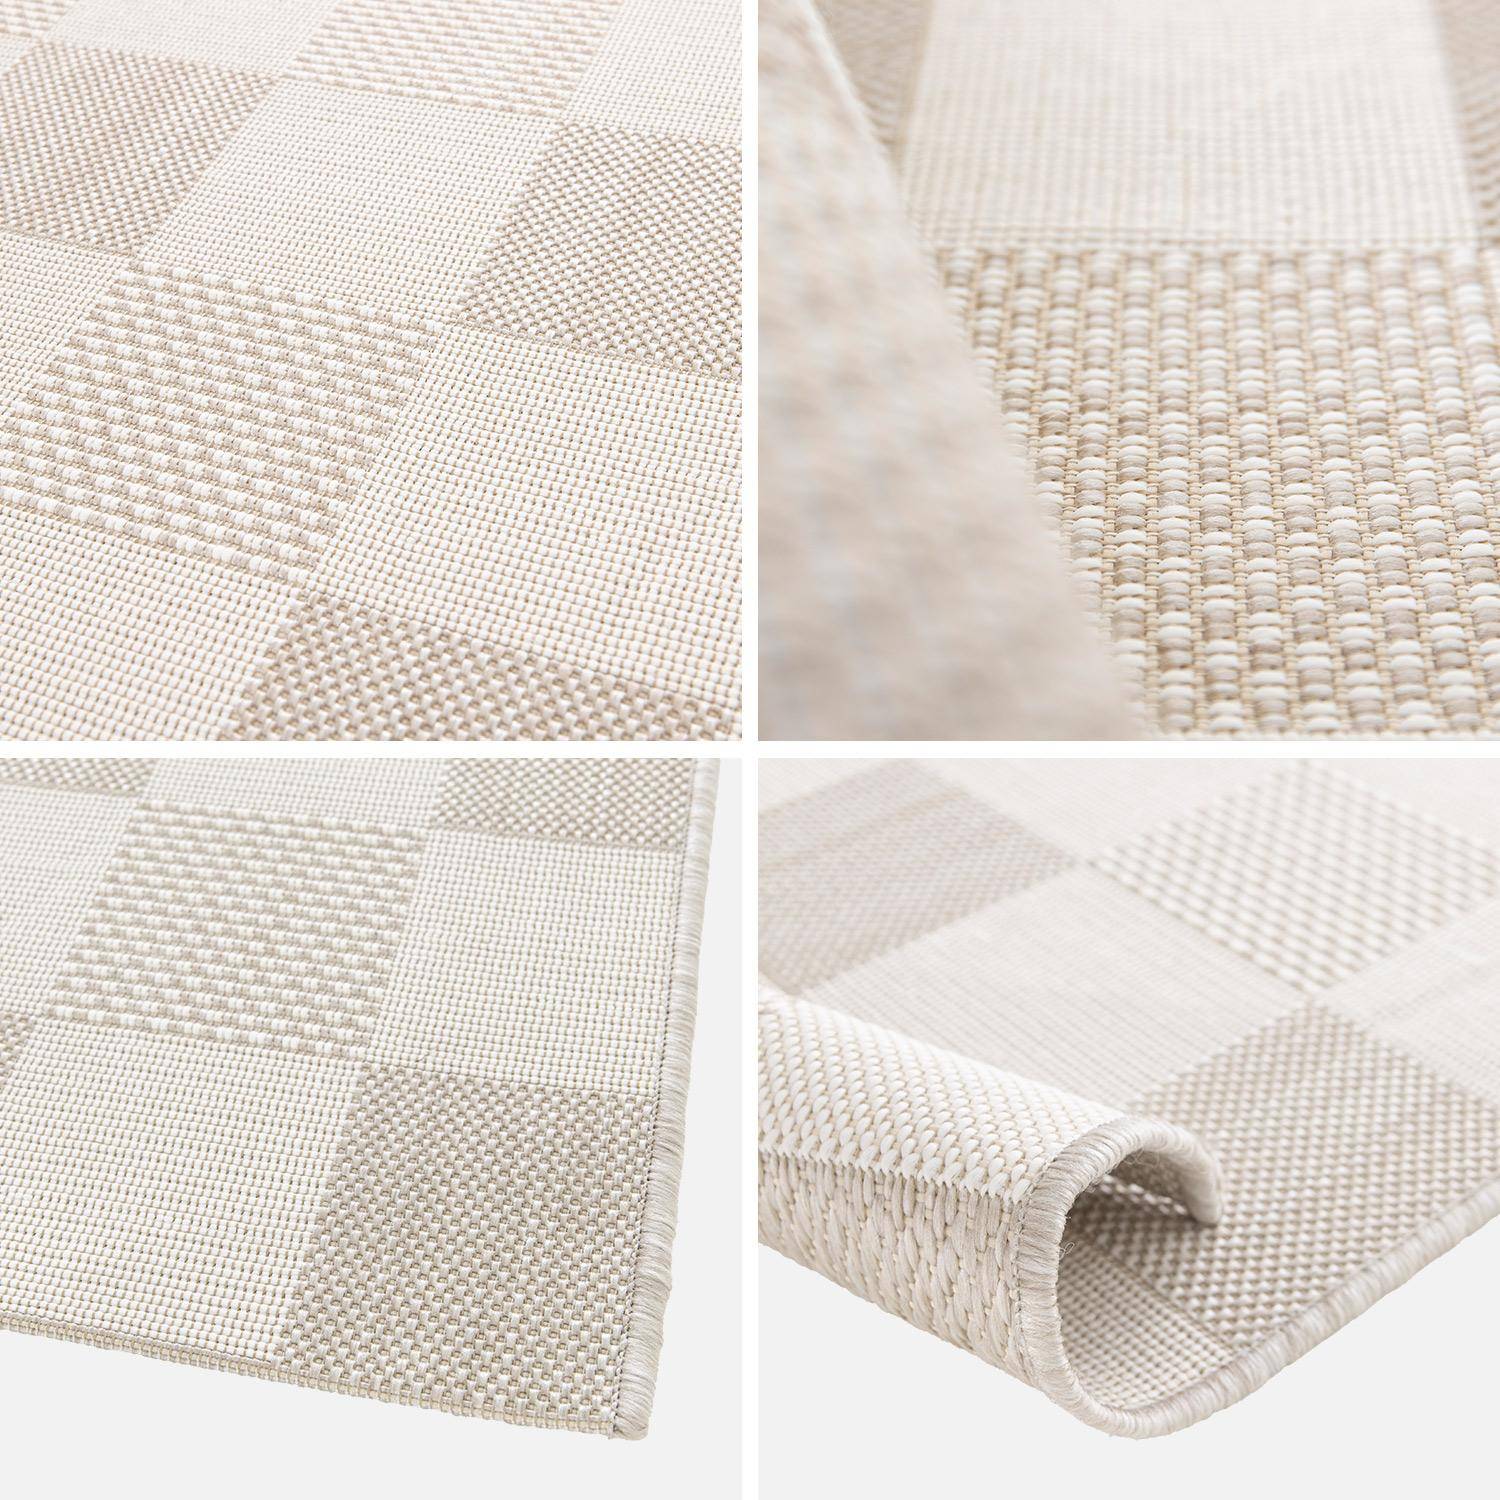 Indoor/outdoor carpet with beige chequered pattern, recycled polyester, Damian, 120 x 170 cm Photo3